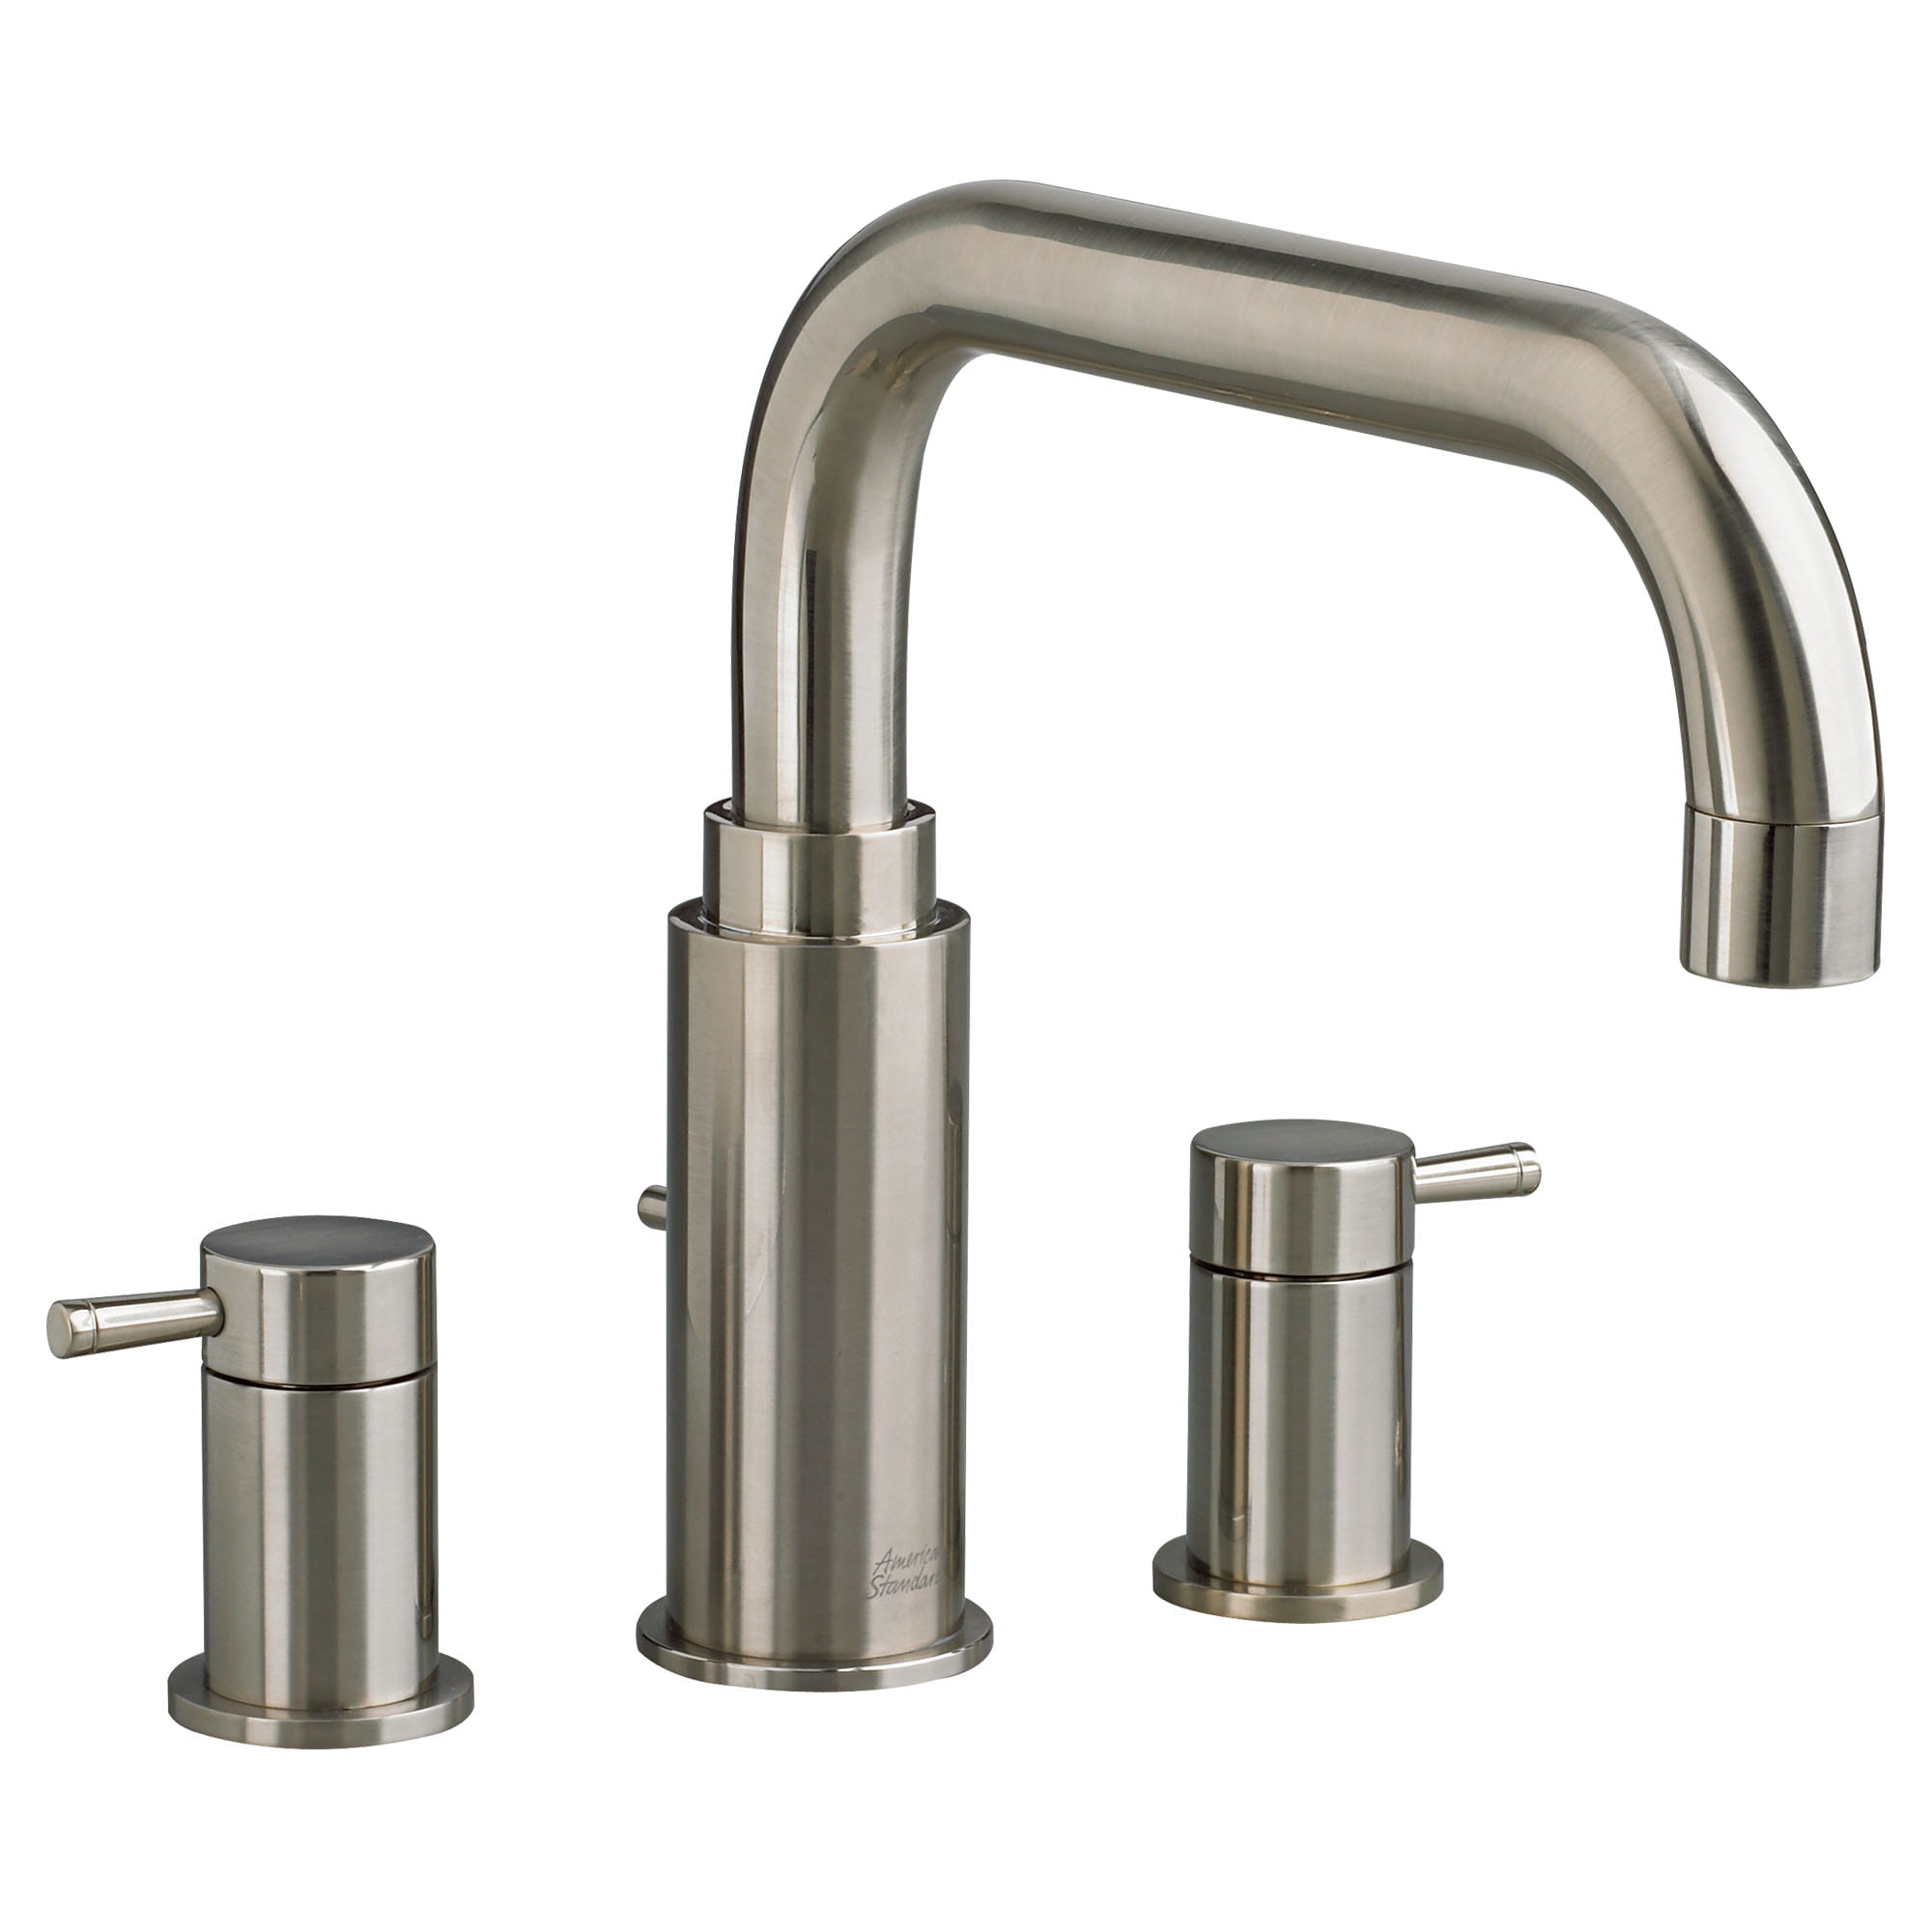 Serin® Bathtub Faucet With Lever Handles for Flash® Rough-In Valve